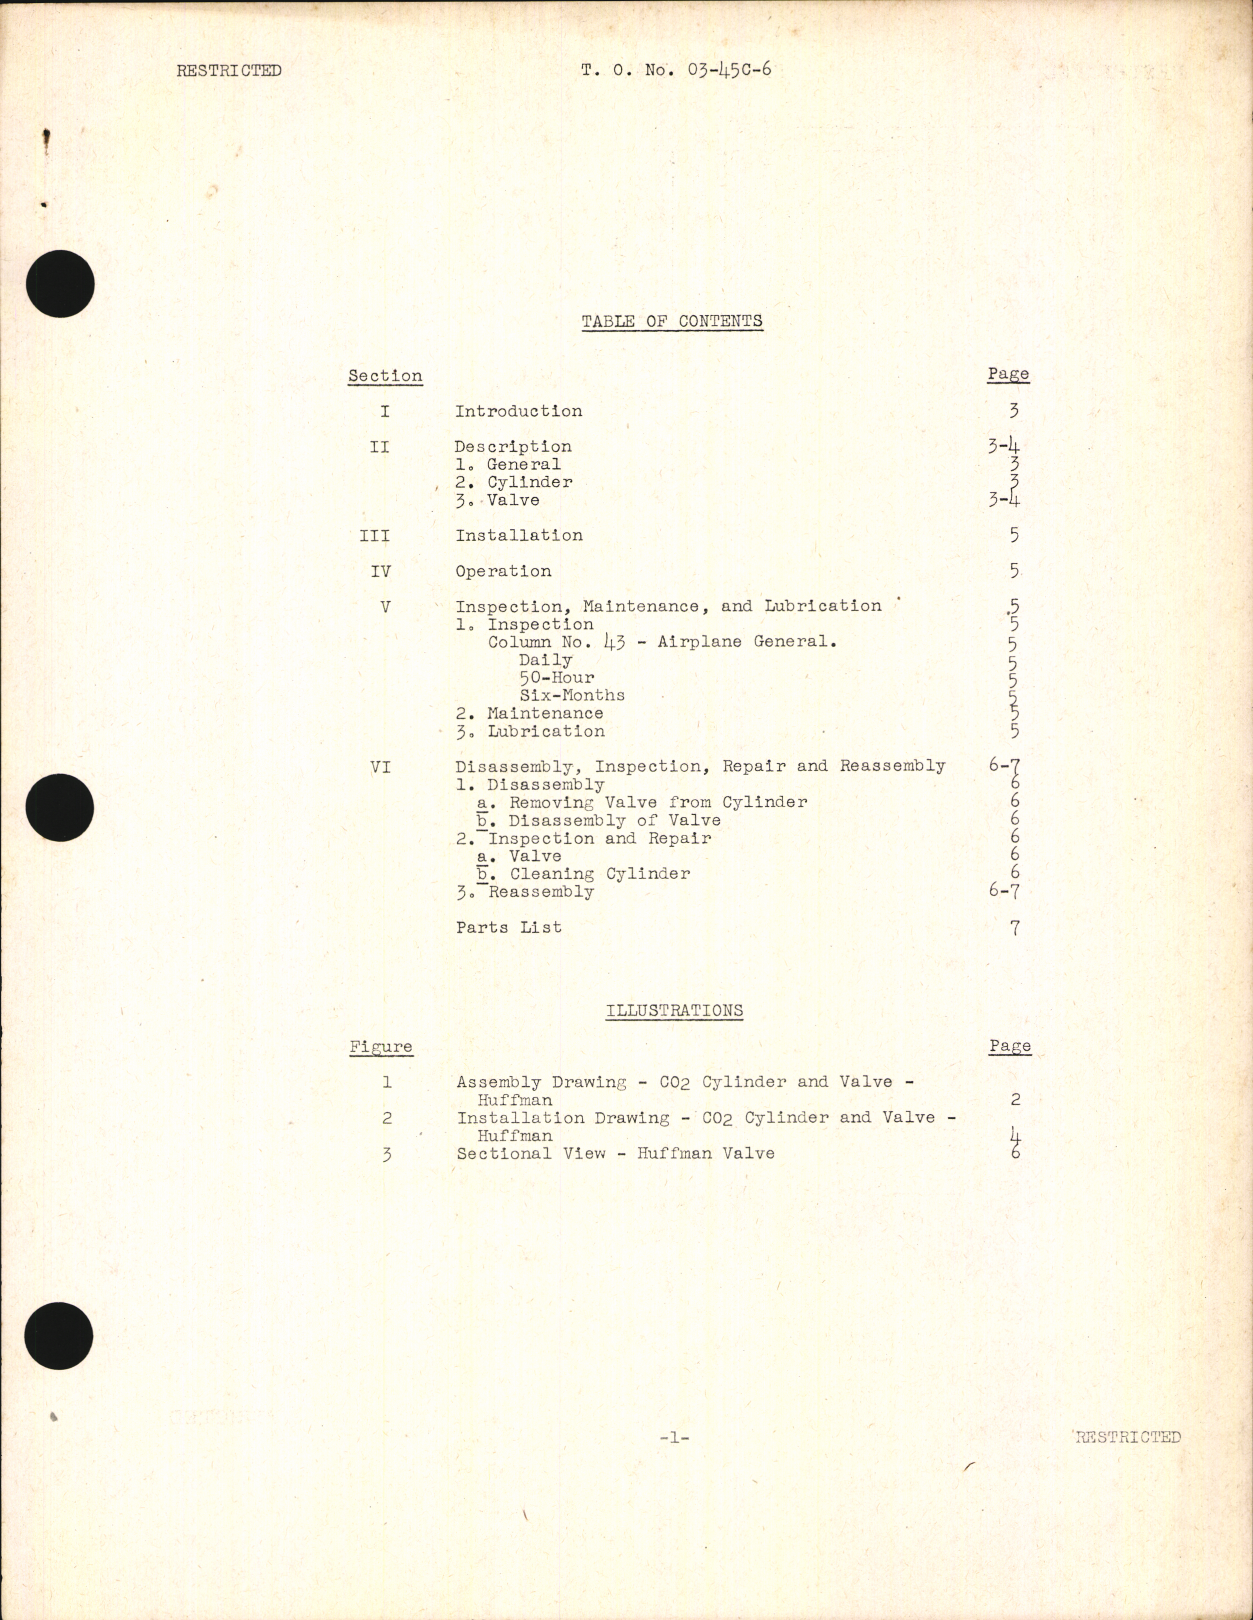 Sample page 3 from AirCorps Library document: Handbook of Instructions for Huffman CO2 Cylinder and Valve Assembly